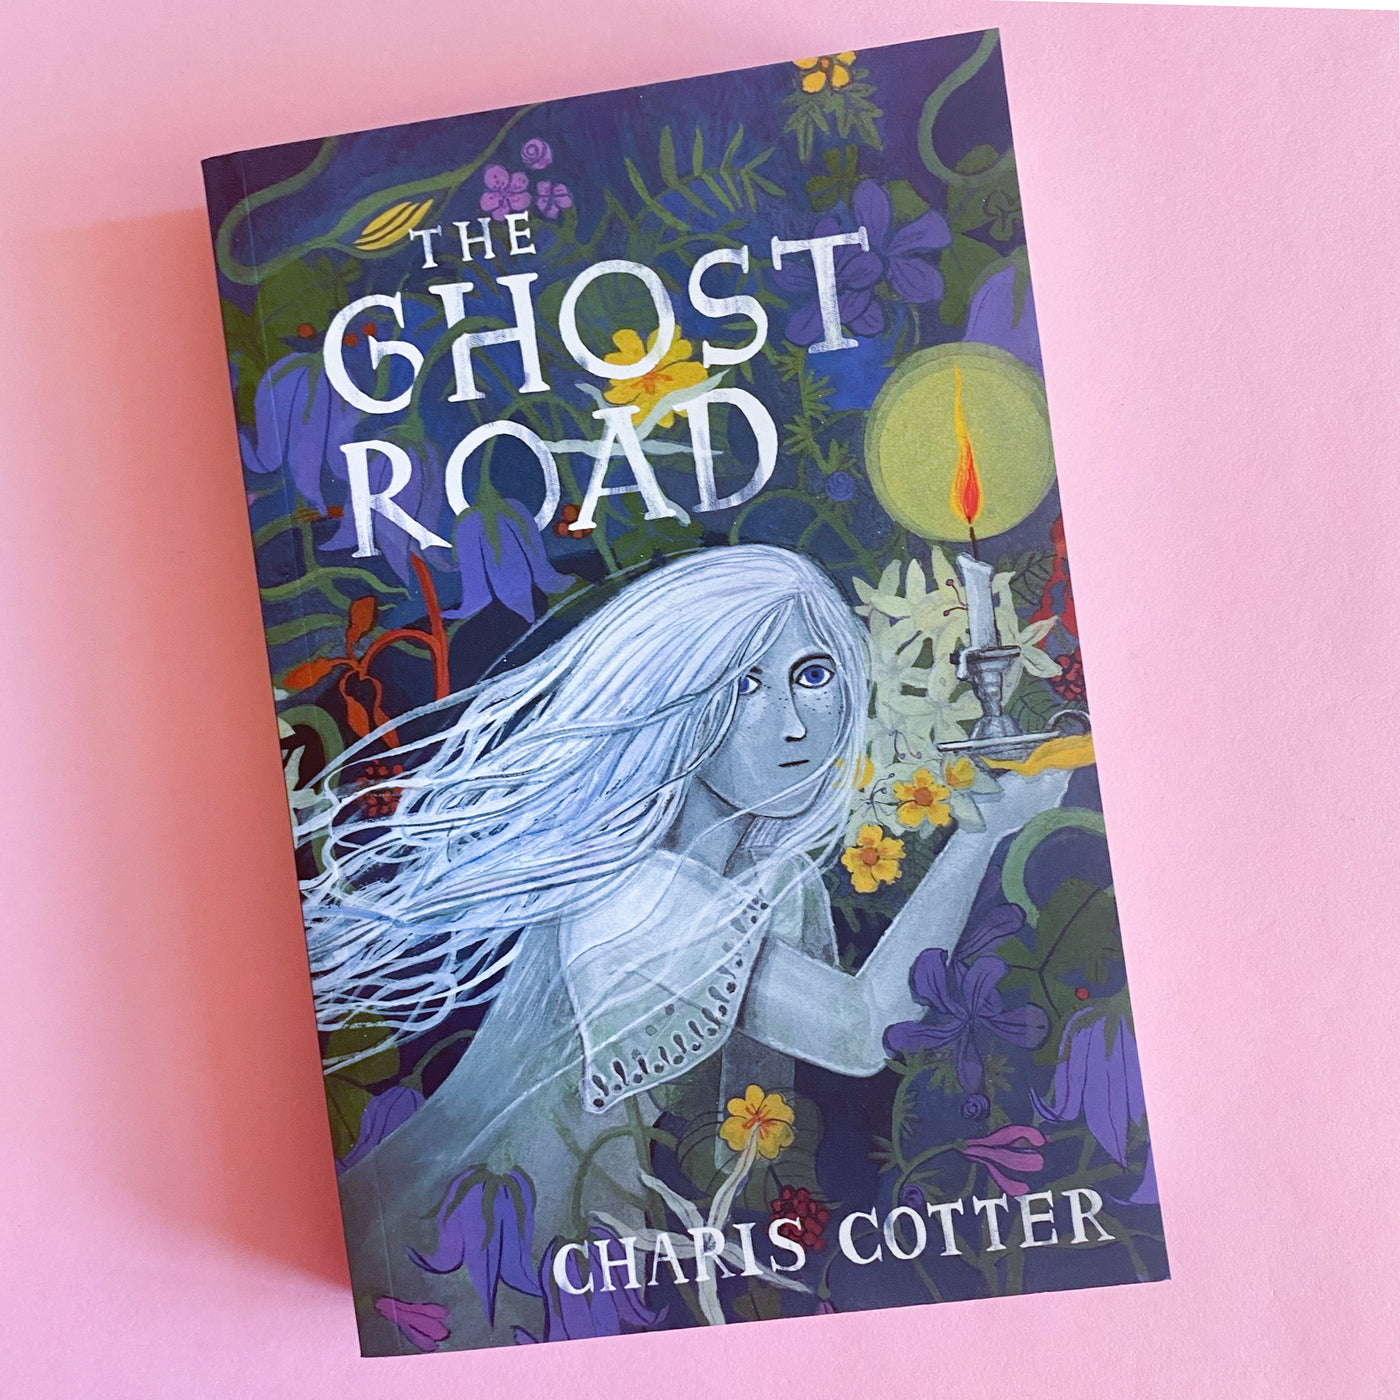 The Ghost Road by Charis Cotter